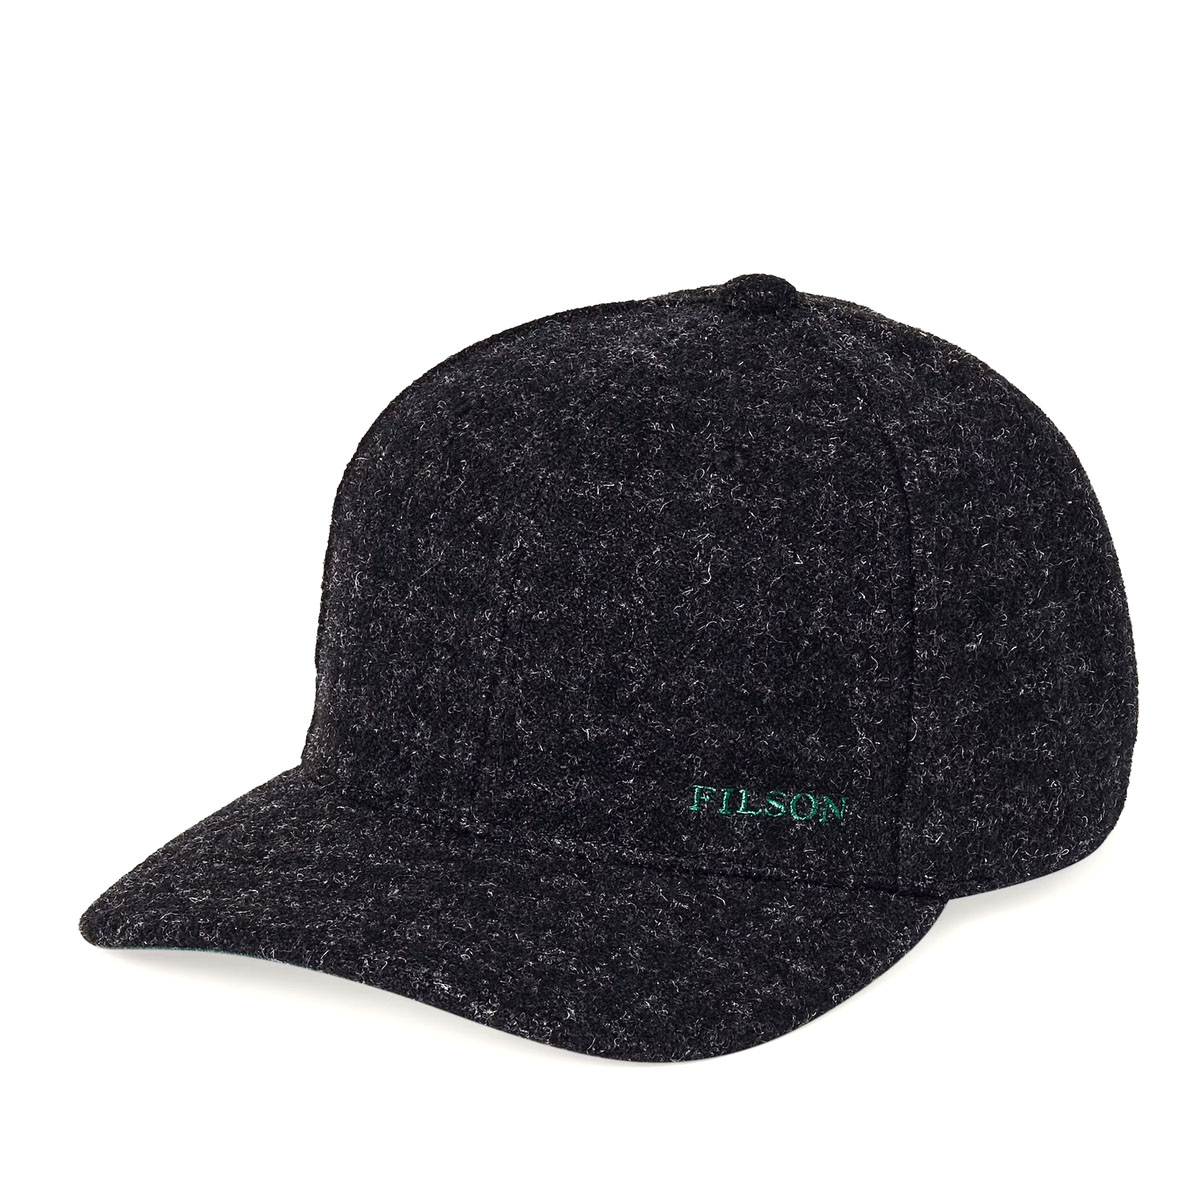 Filson Wool Logger Cap Black Marl Heather Check, Filson's warmest logger cap, made with weather-resistant Mackinaw Wool